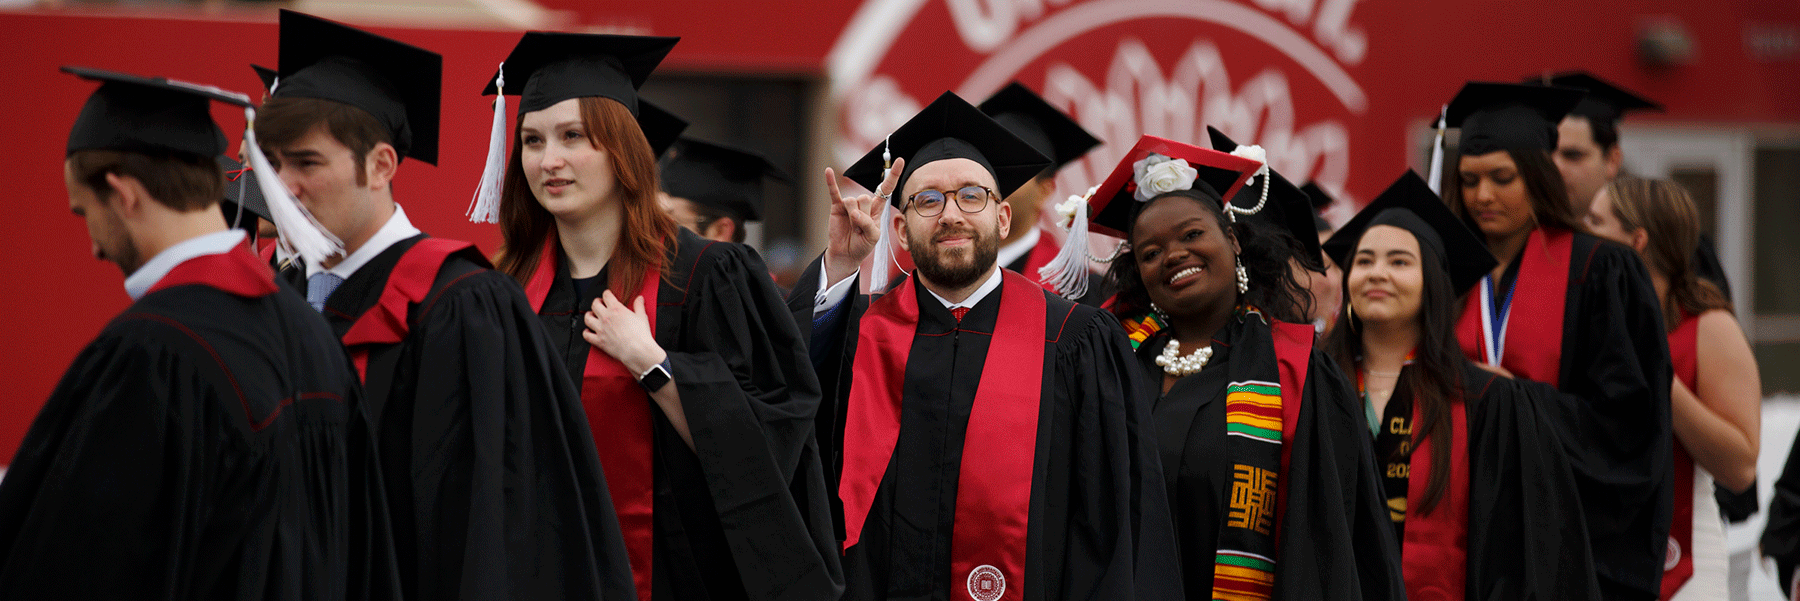 A male and female graduate smile at the camera as a group files into the commencement ceremony.